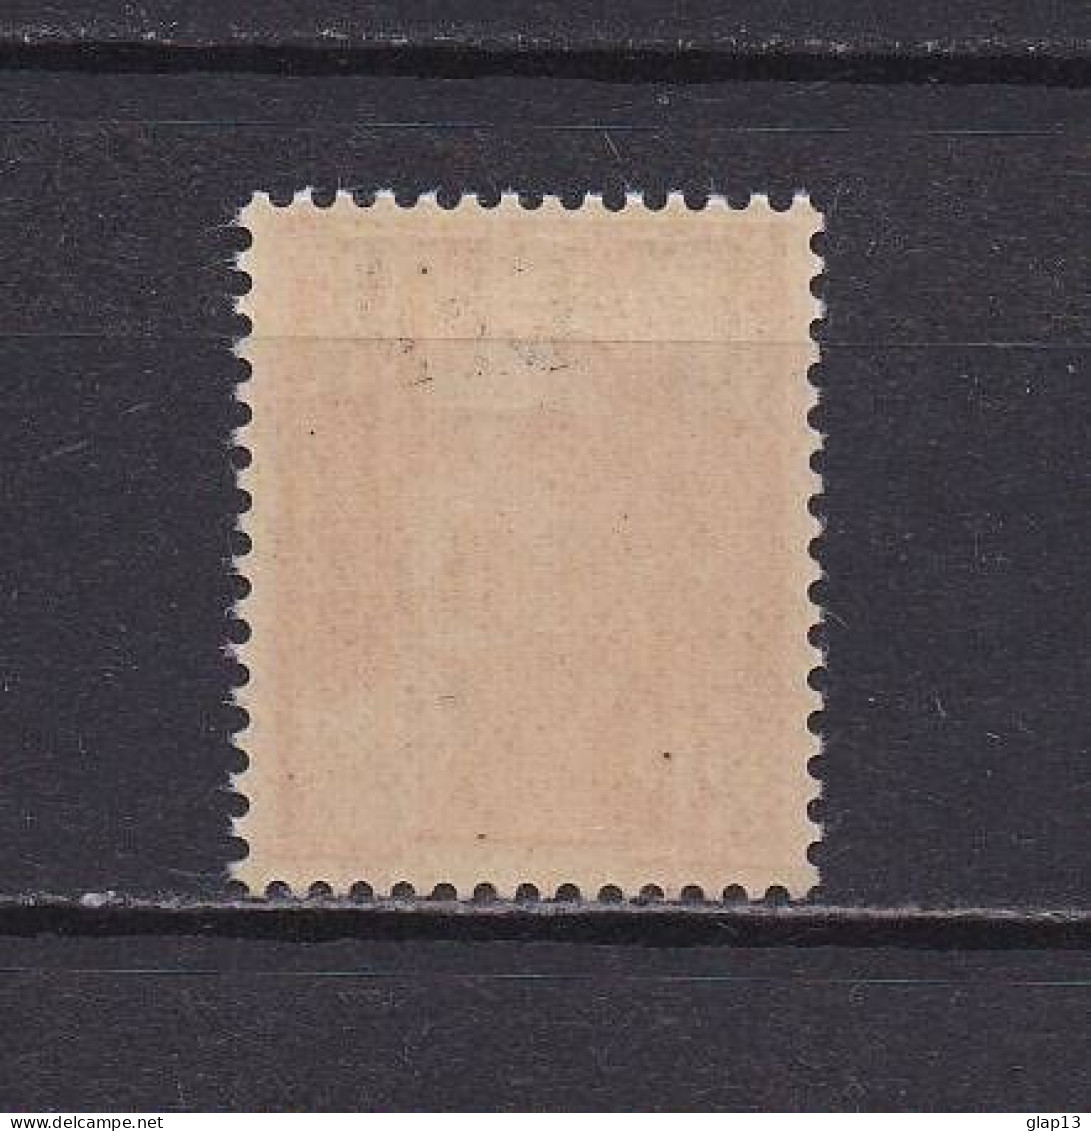 REUNION 1949 TIMBRE N°299A NEUF** MARIANNE - Unused Stamps